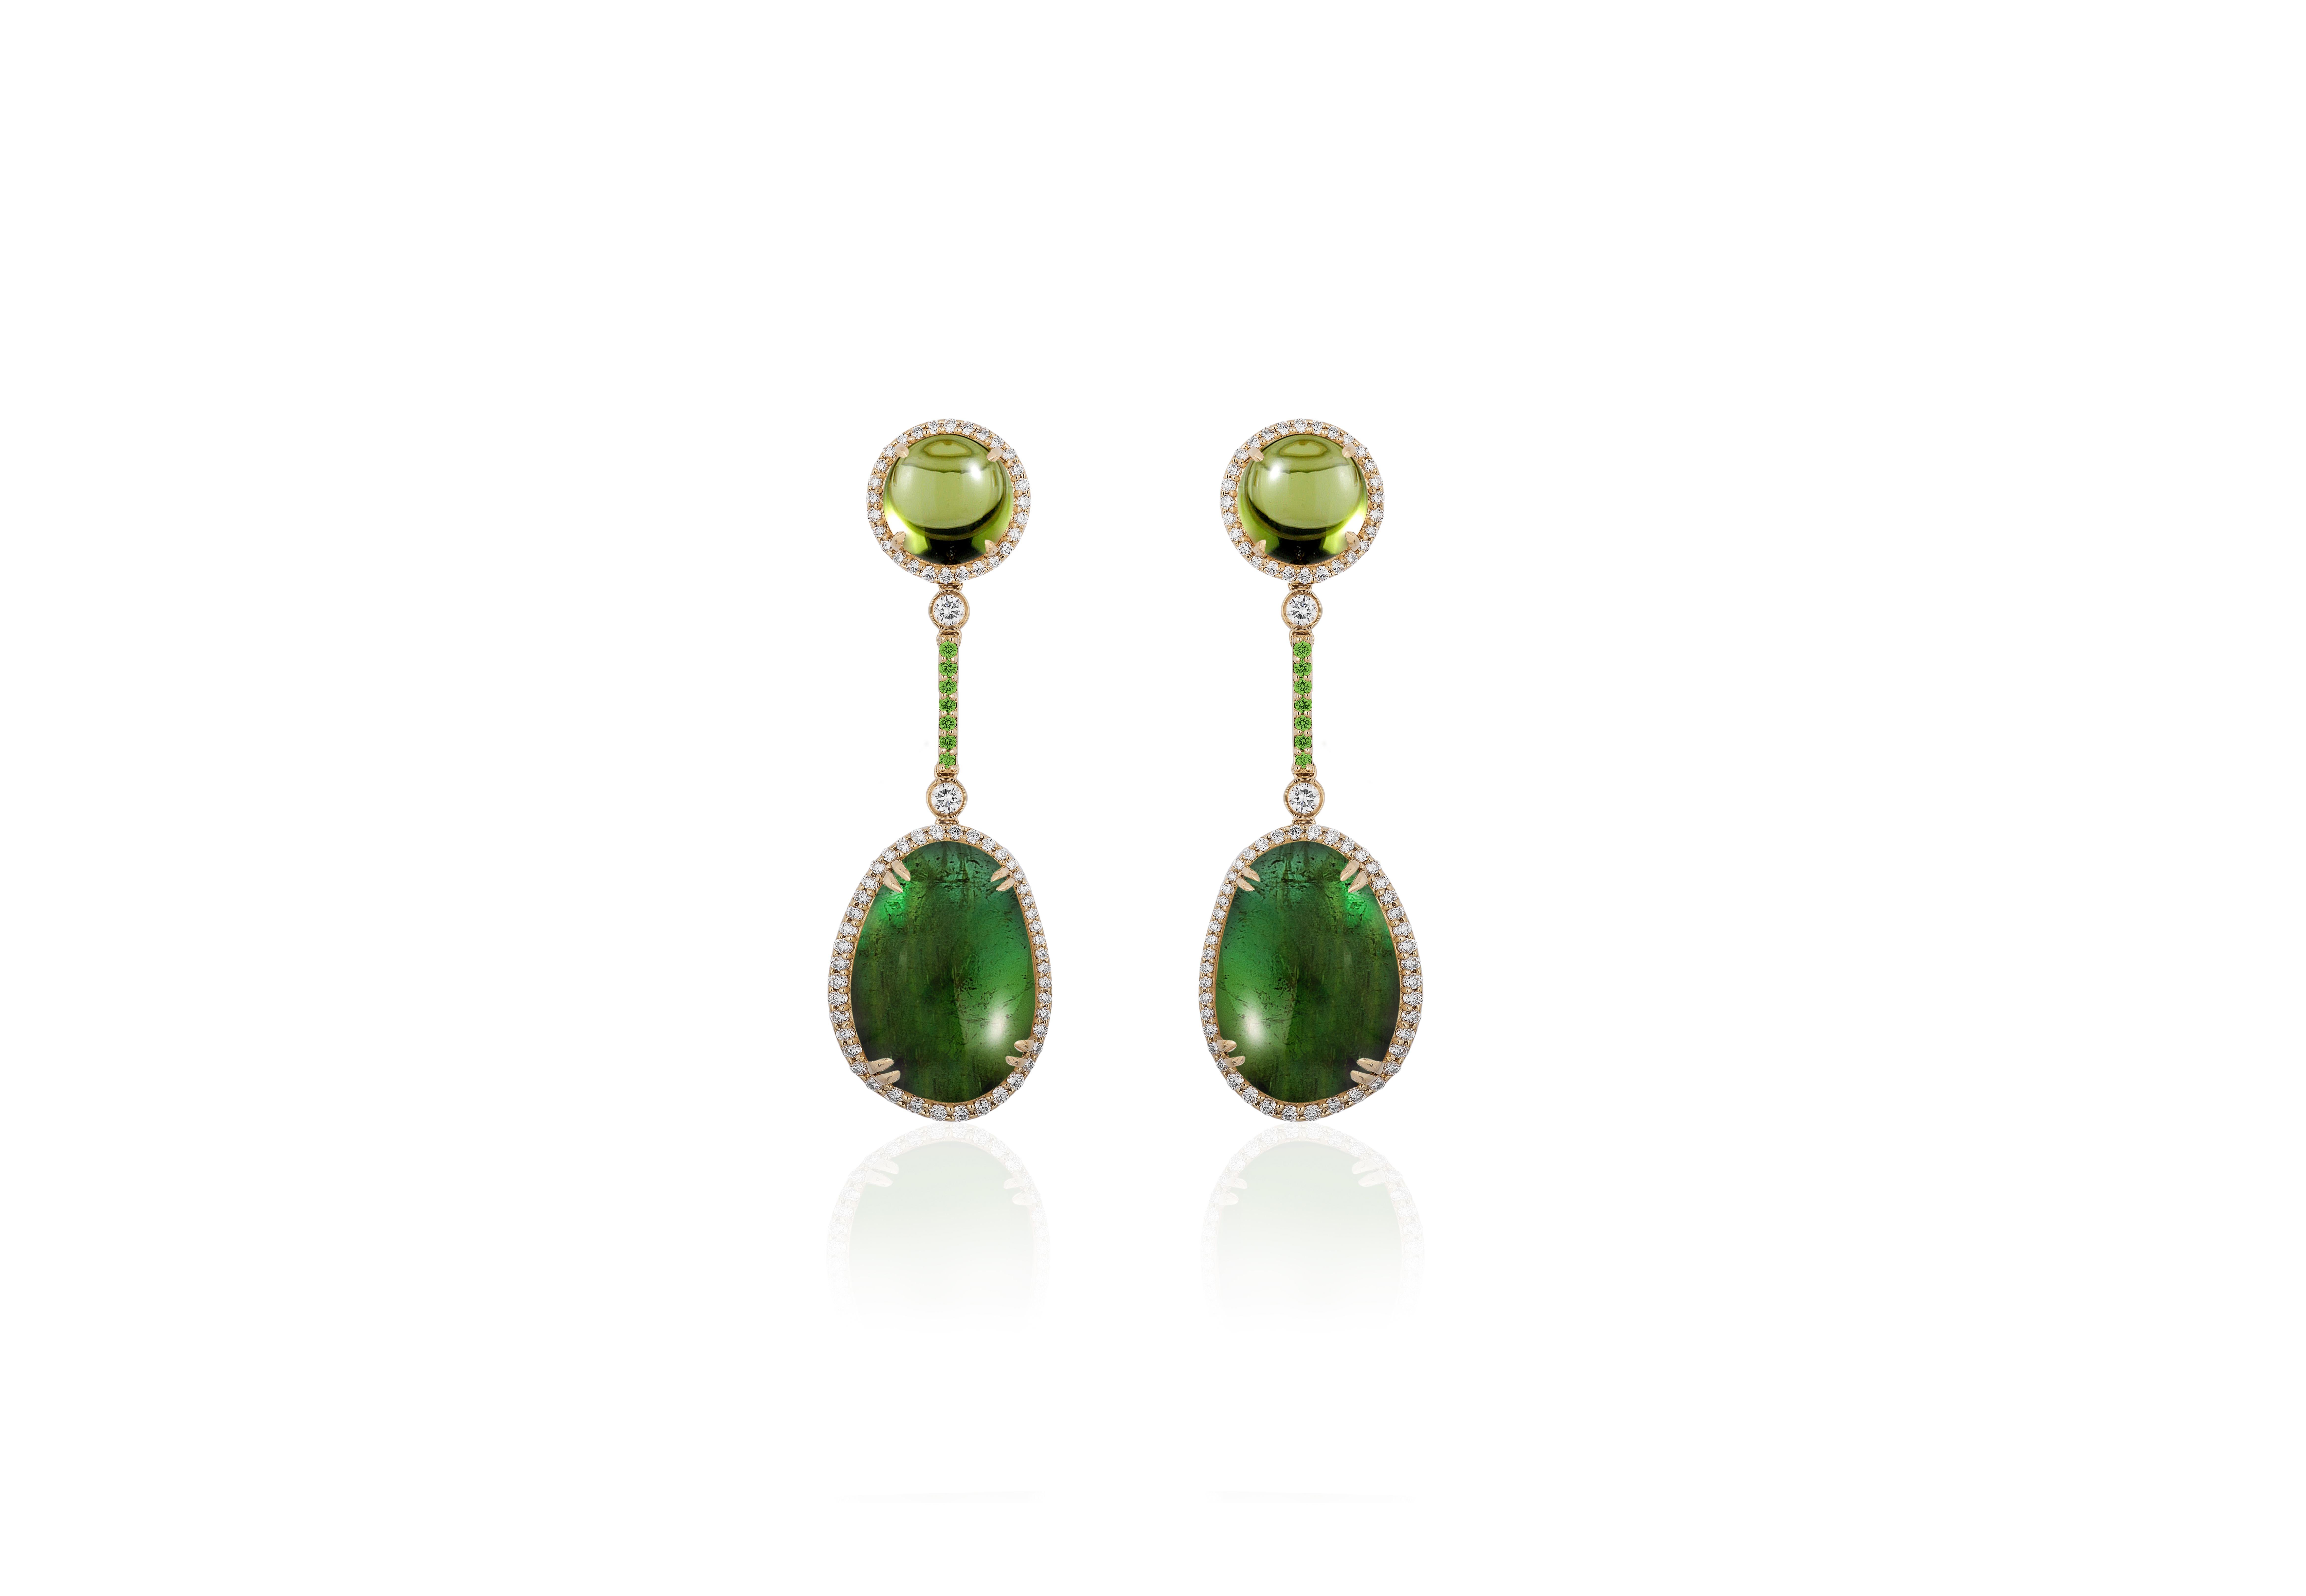 Peridot Top & Green Tourmaline Tumbled Drop Earrings with Diamonds and Tsavorite in 18K Yellow Gold, from 'G-One' Collection

Approx. Stone Wt: 19.92 Carats (Green Tourmaline), 0.27 Carats (Tsavorite)

Diamonds: G-H / VS, Approx. Wt: 0.69 Carats